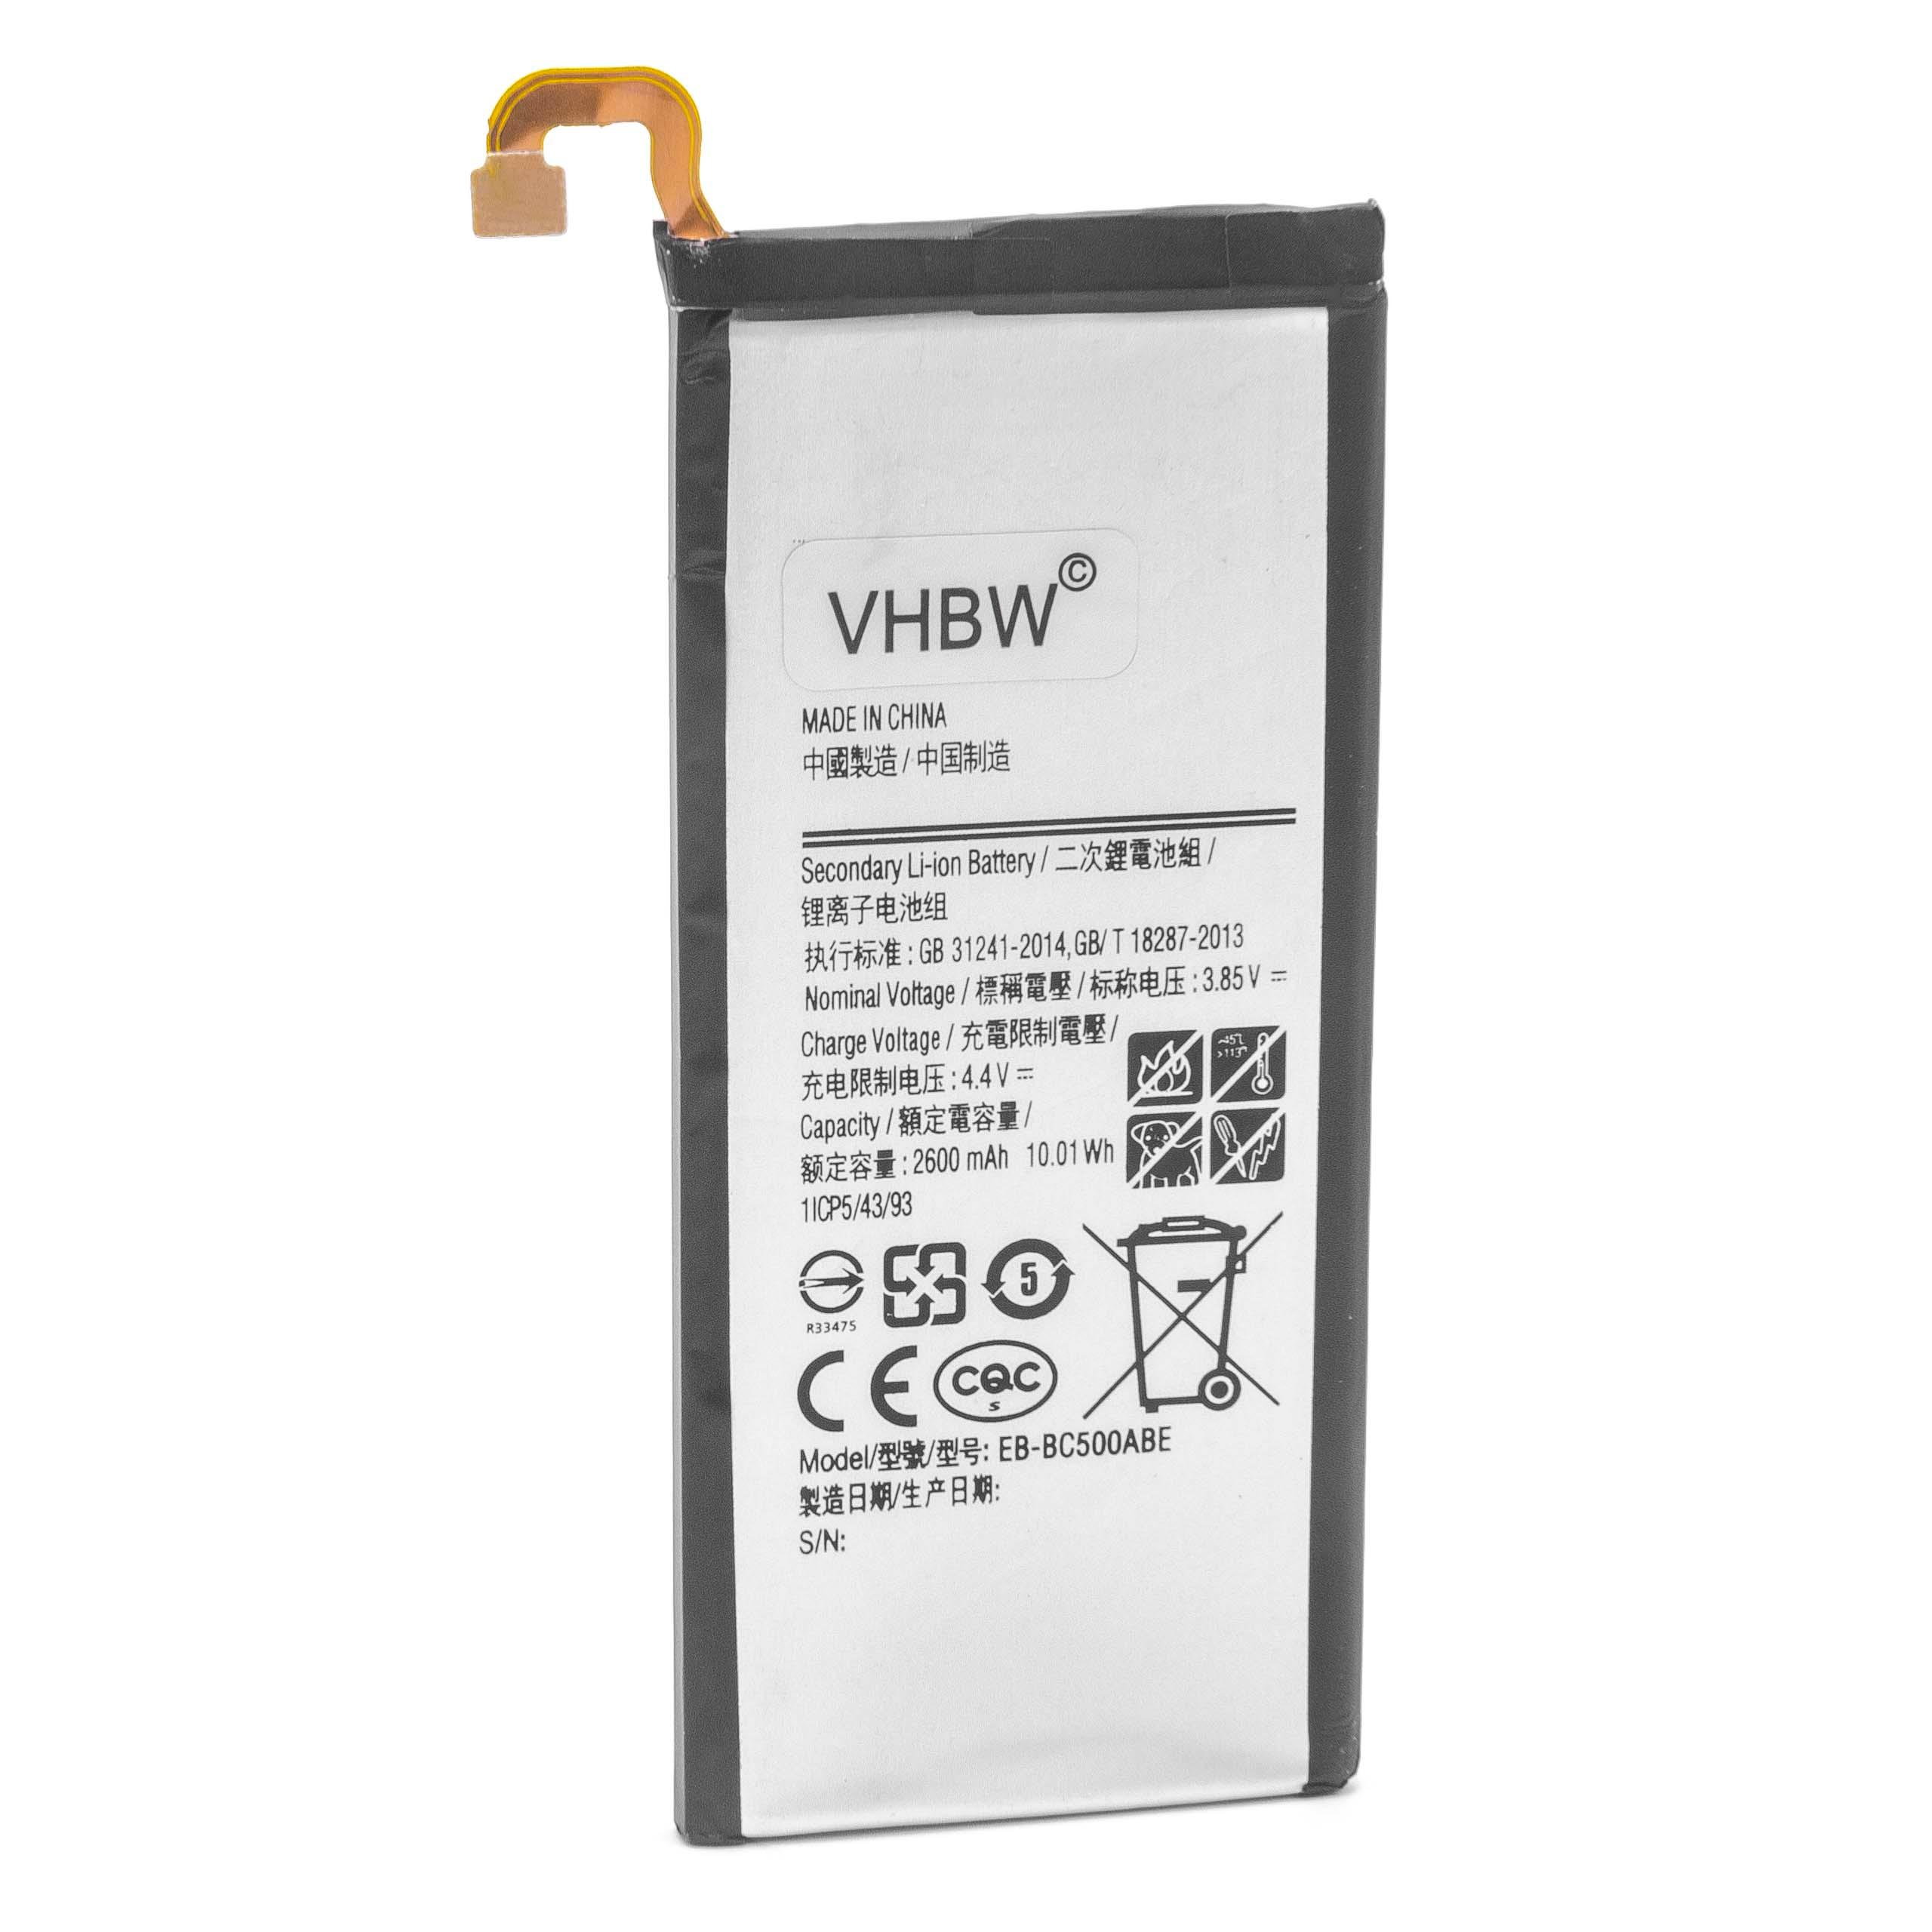 Mobile Phone Battery Replacement for Samsung EB-BC500ABE - 2600mAh 3.85V Li-polymer